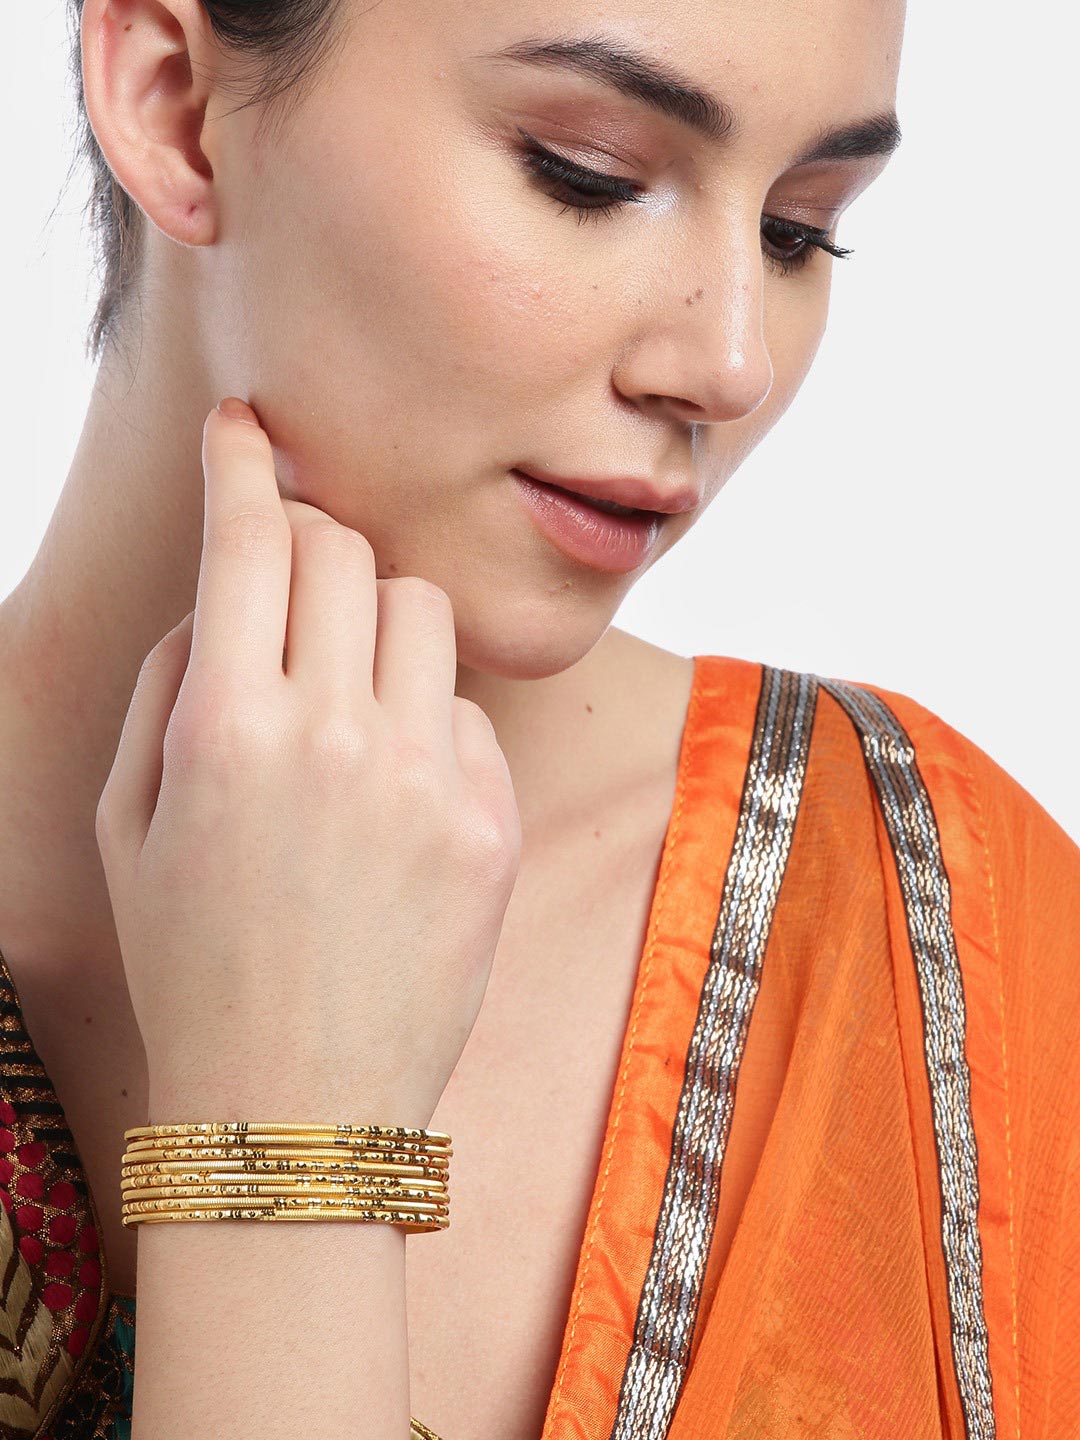 Set of 8 Gold-Plated Bangles